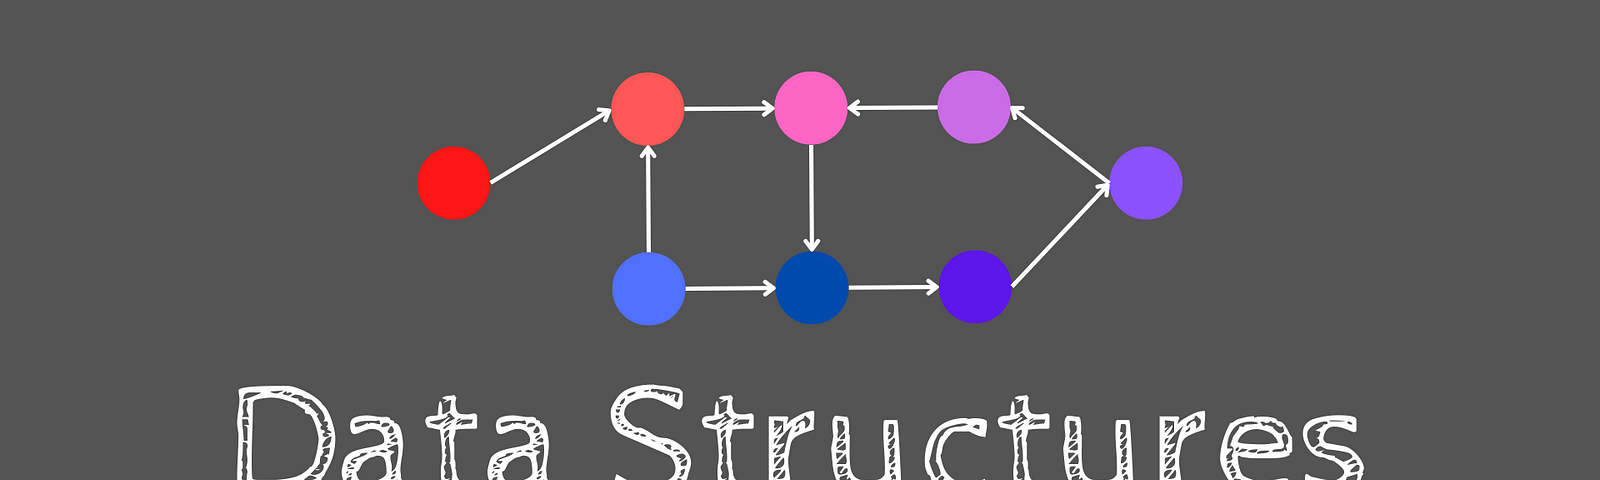 Data structures header with graph example